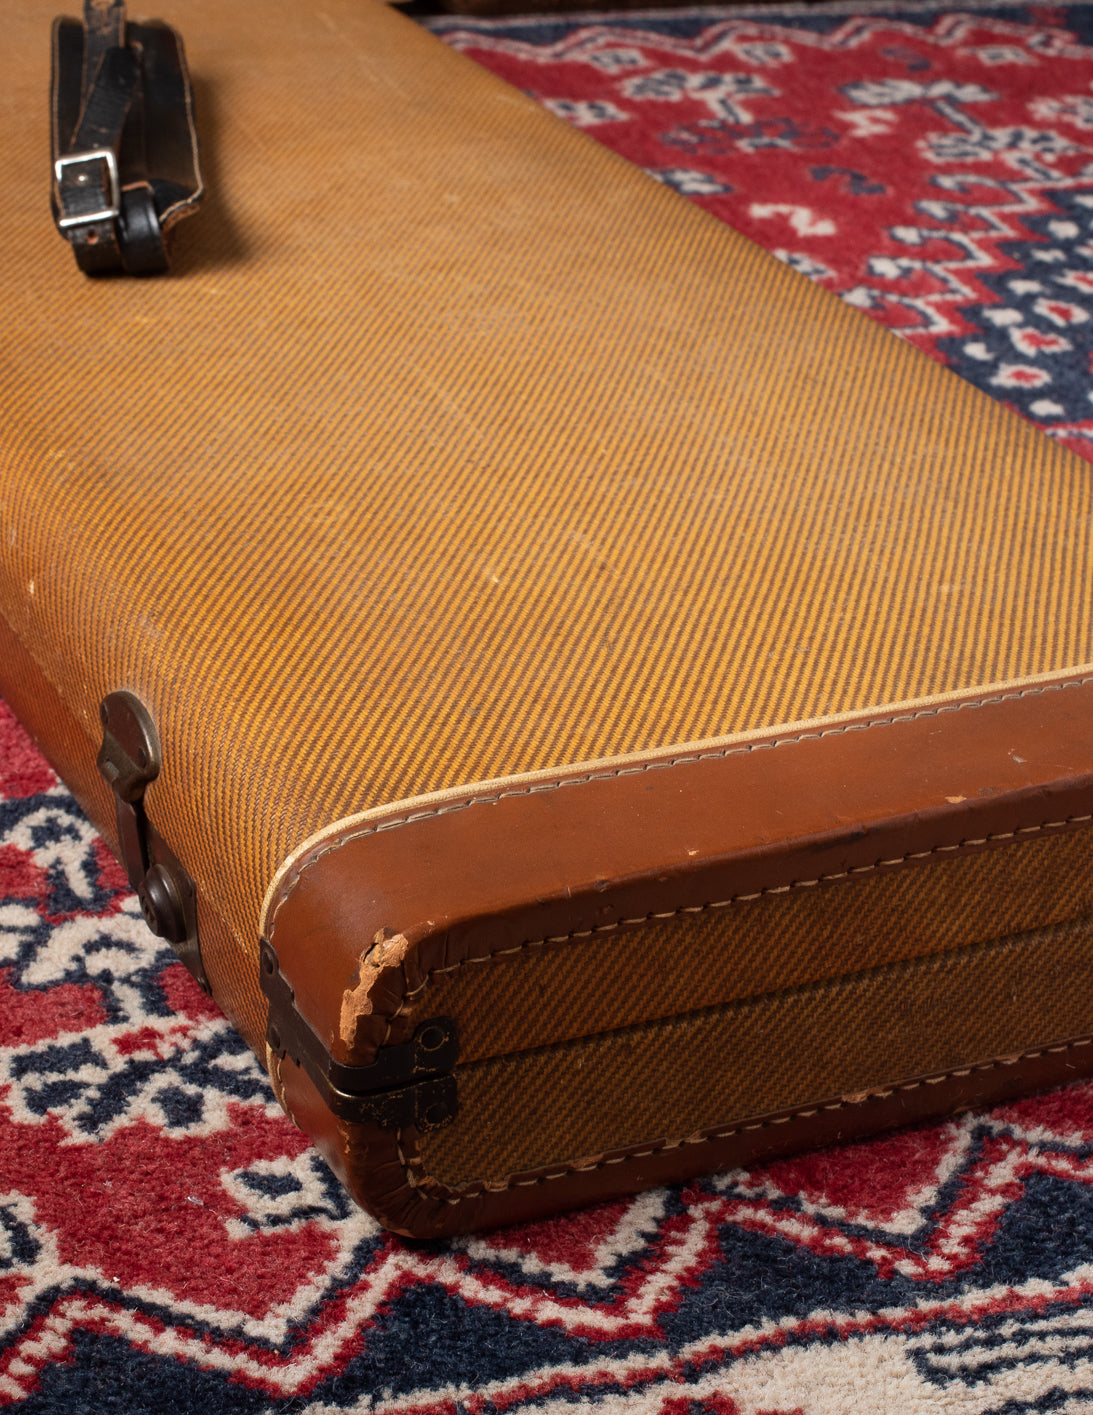 Tweed center pocket case with leather ends